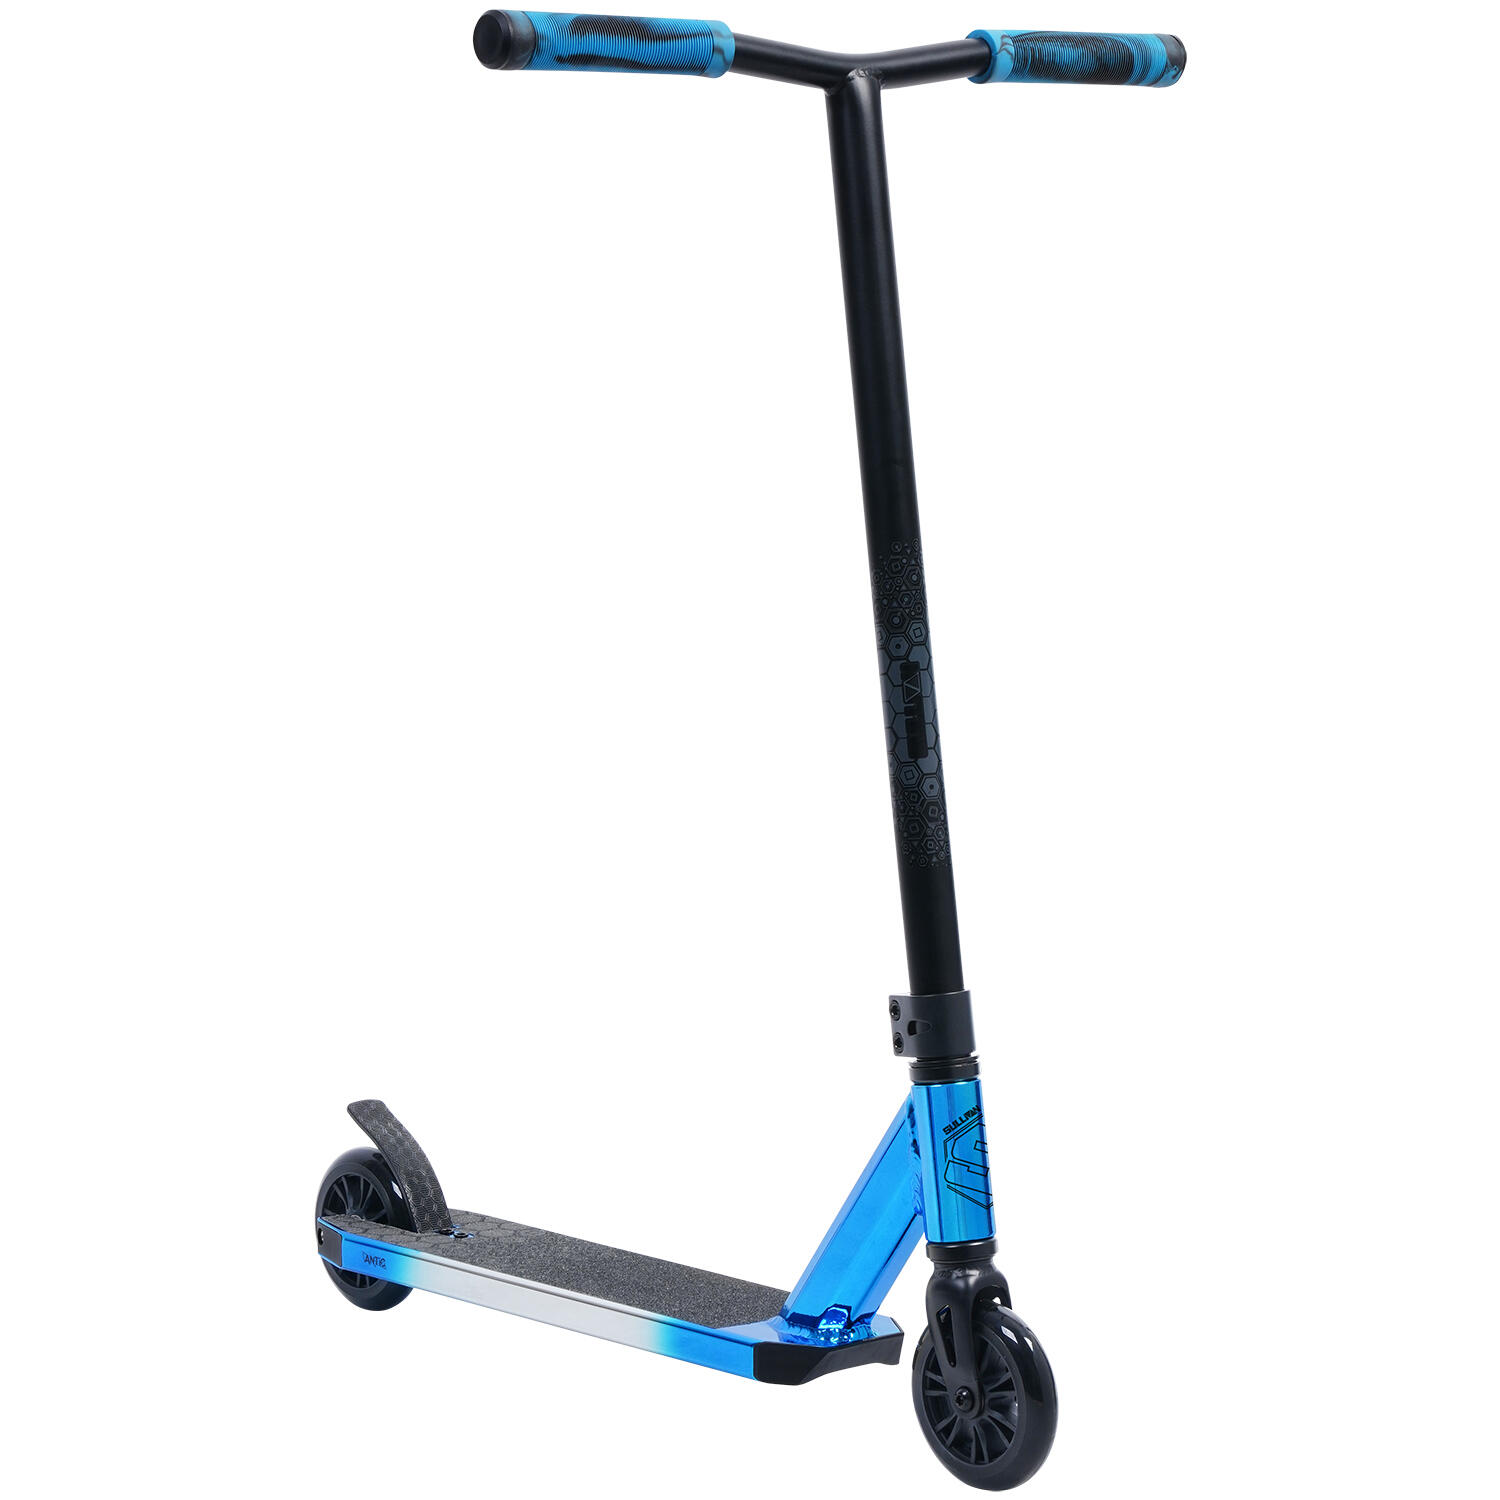 Antic Stunt Scooter, Electro Blue 1/5